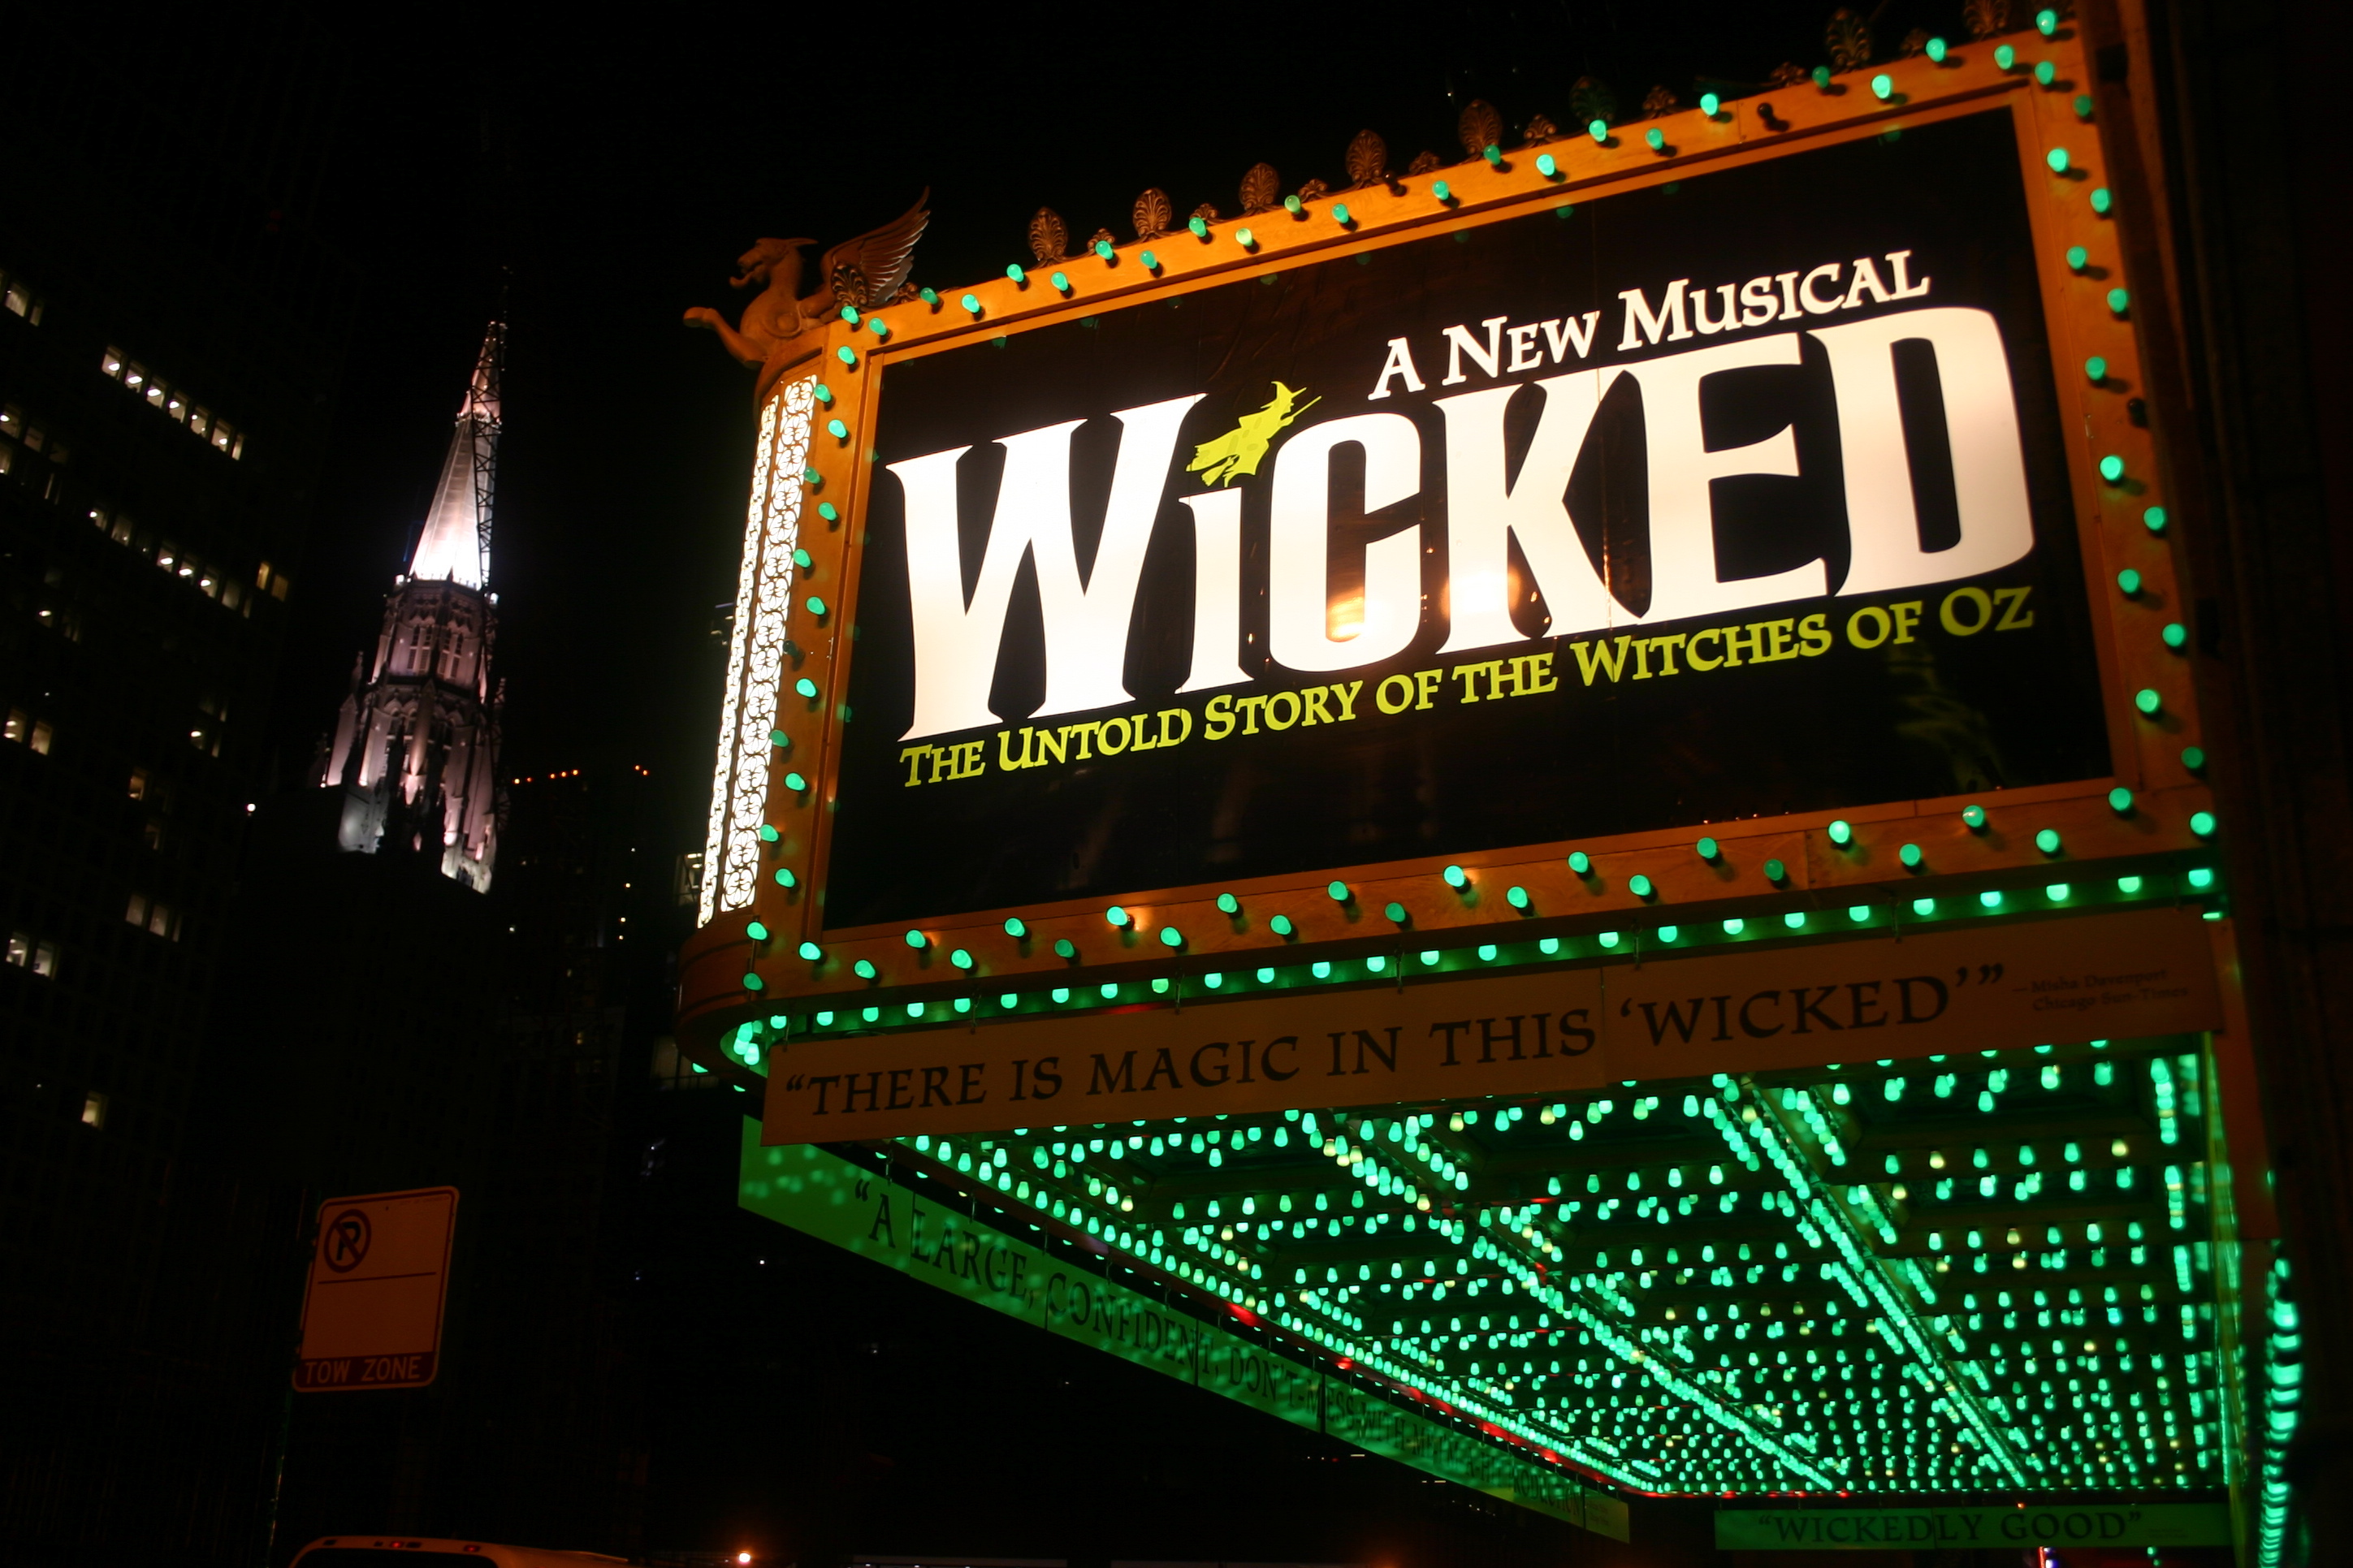 Film adaptation of Wicked announced to be released in 2019